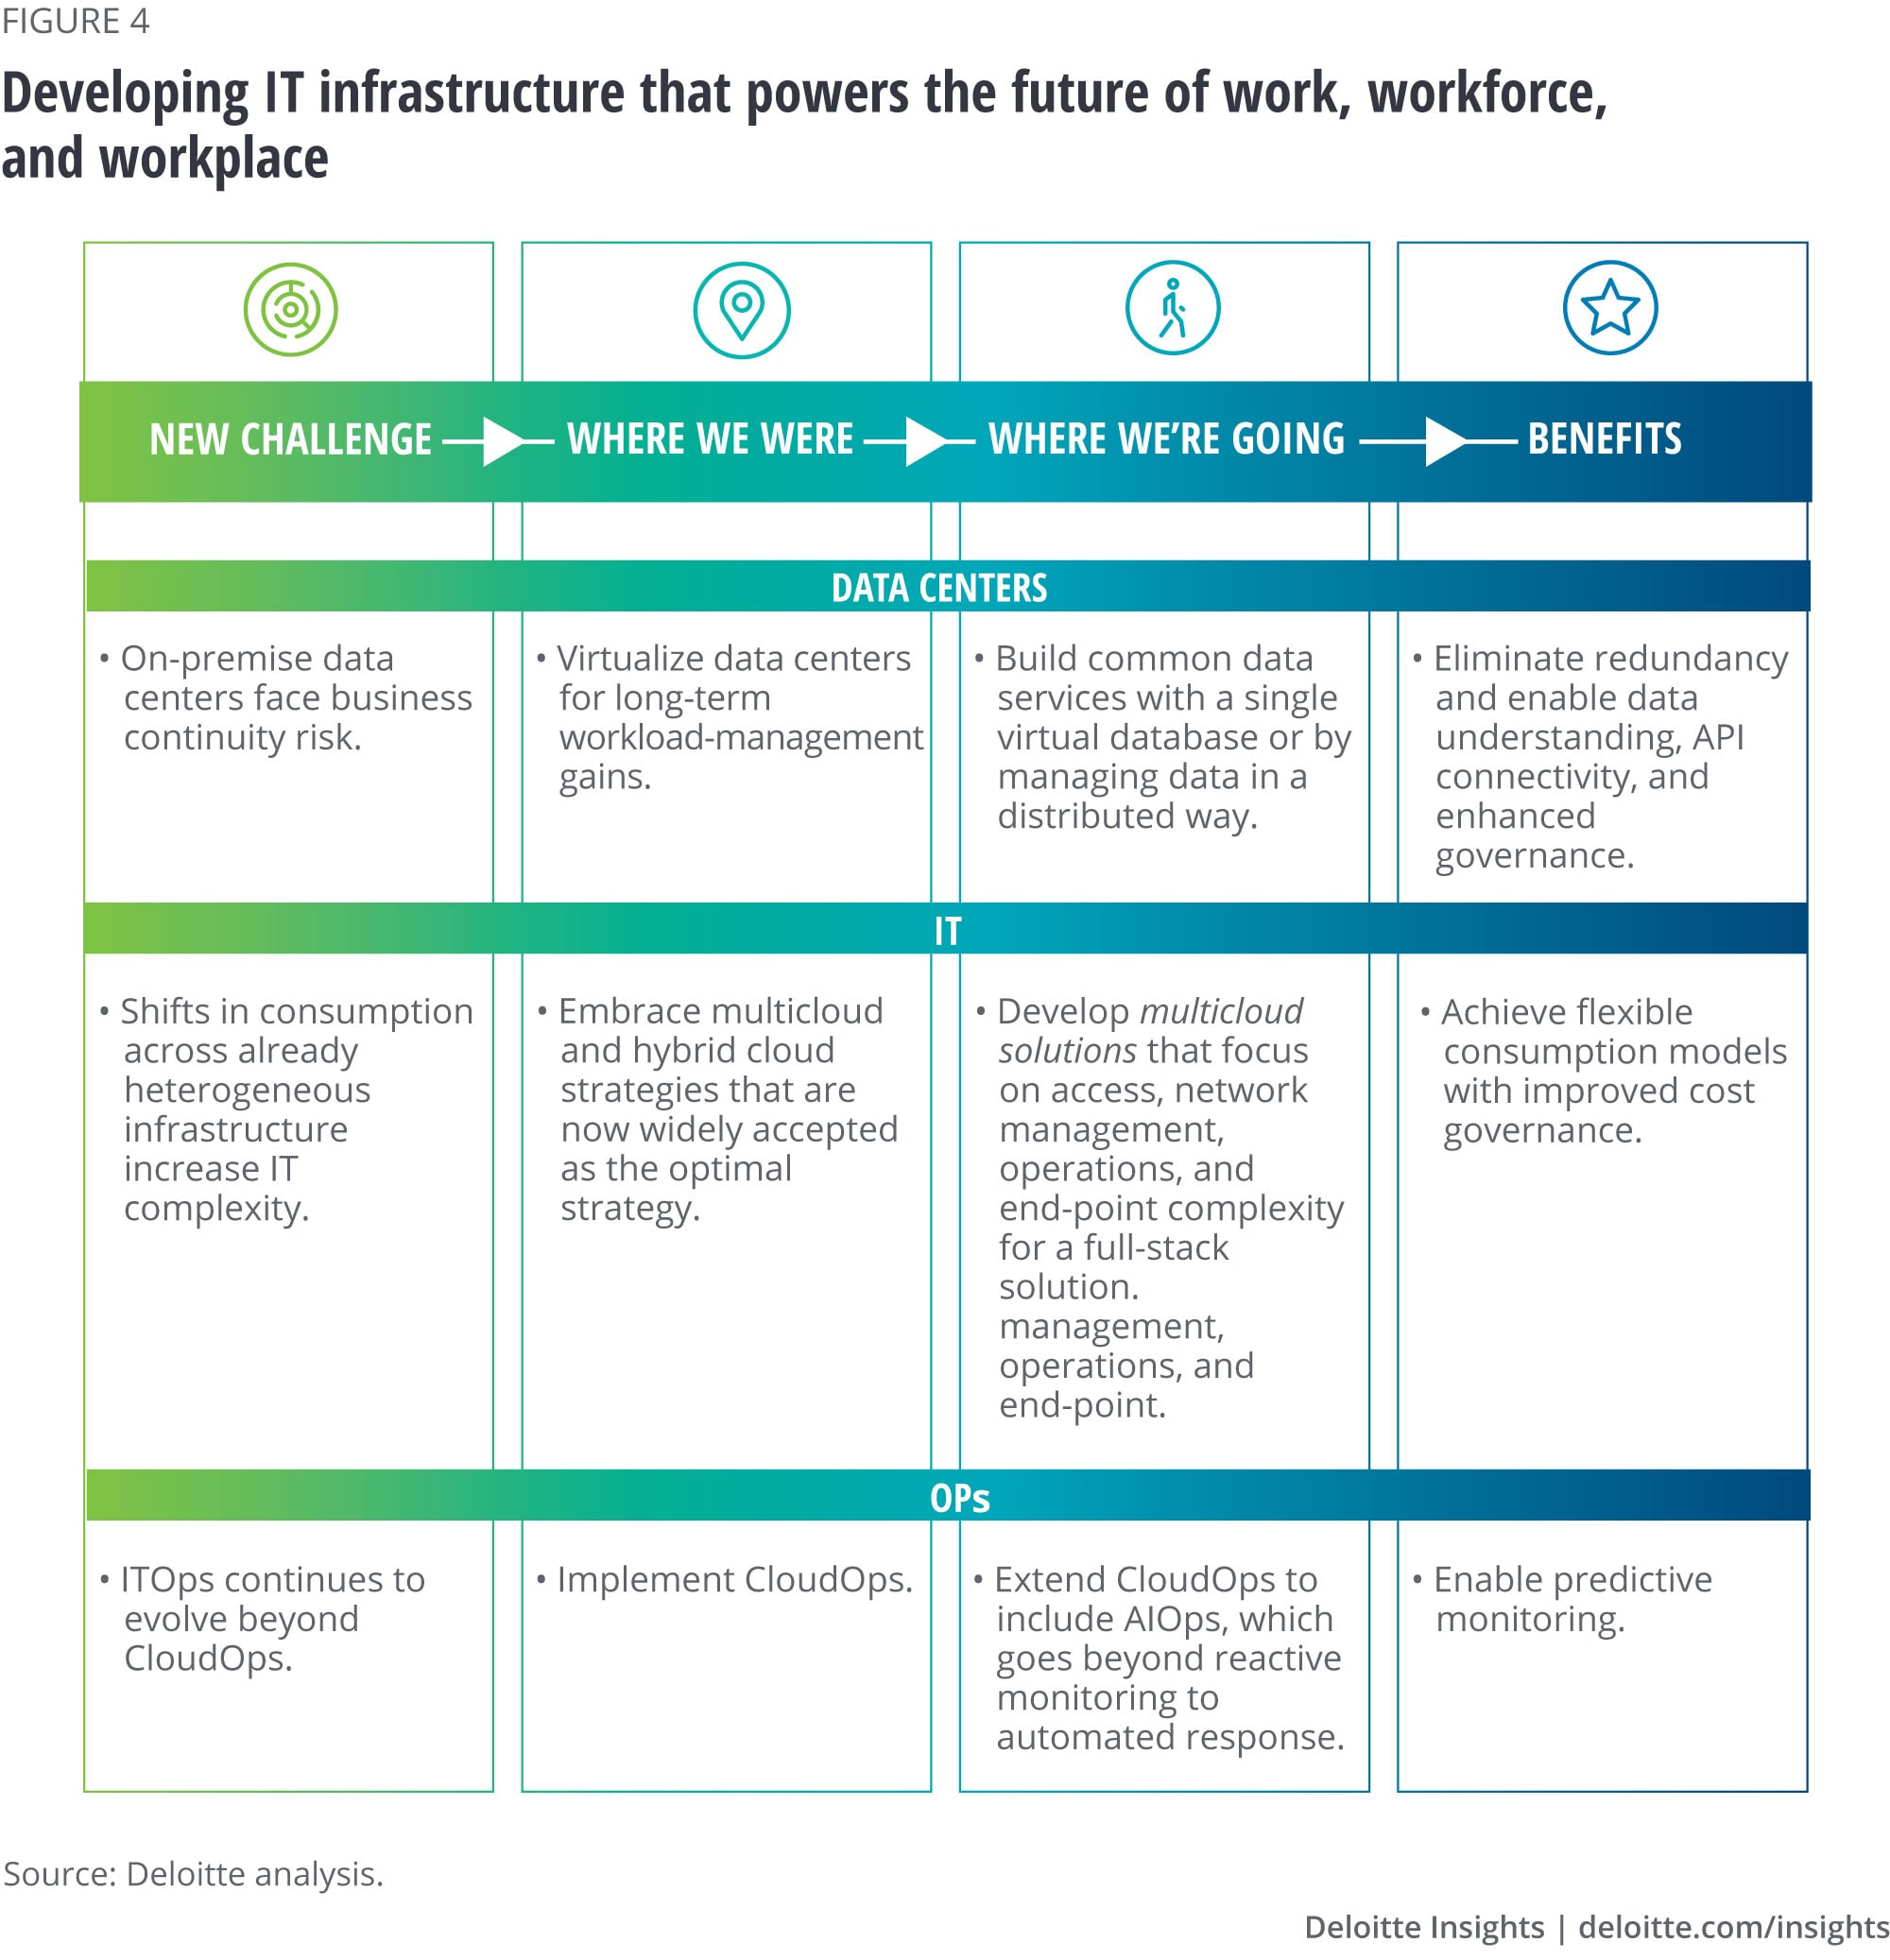 Developing IT infrastructure that powers the future of work, workforce, and workplace